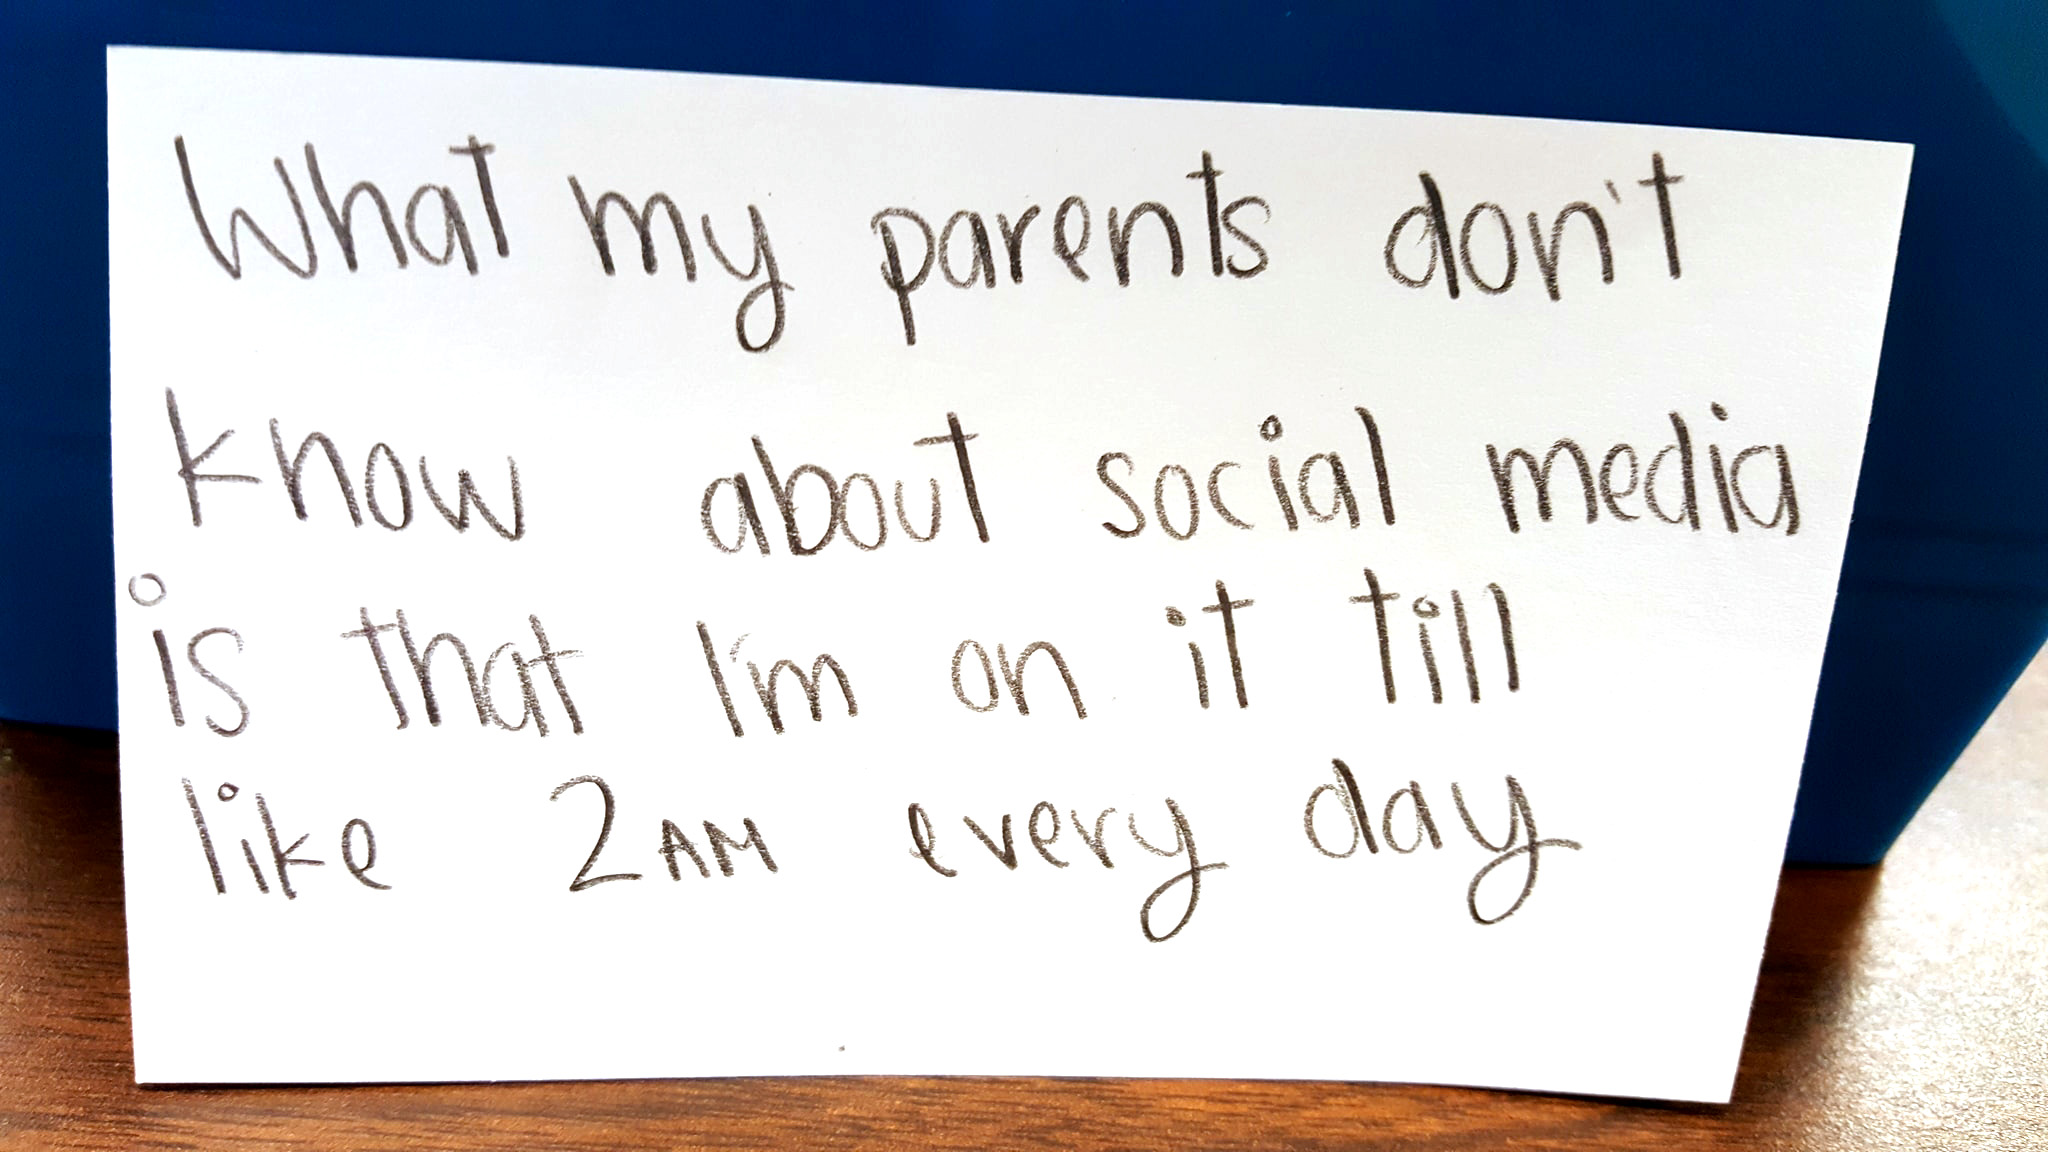 PHOTO: Skipper Coates, a teacher in Pleasant Grove, Utah, asked her students to write on cards what their parents don't know about social media. These are a sample of the student's response.